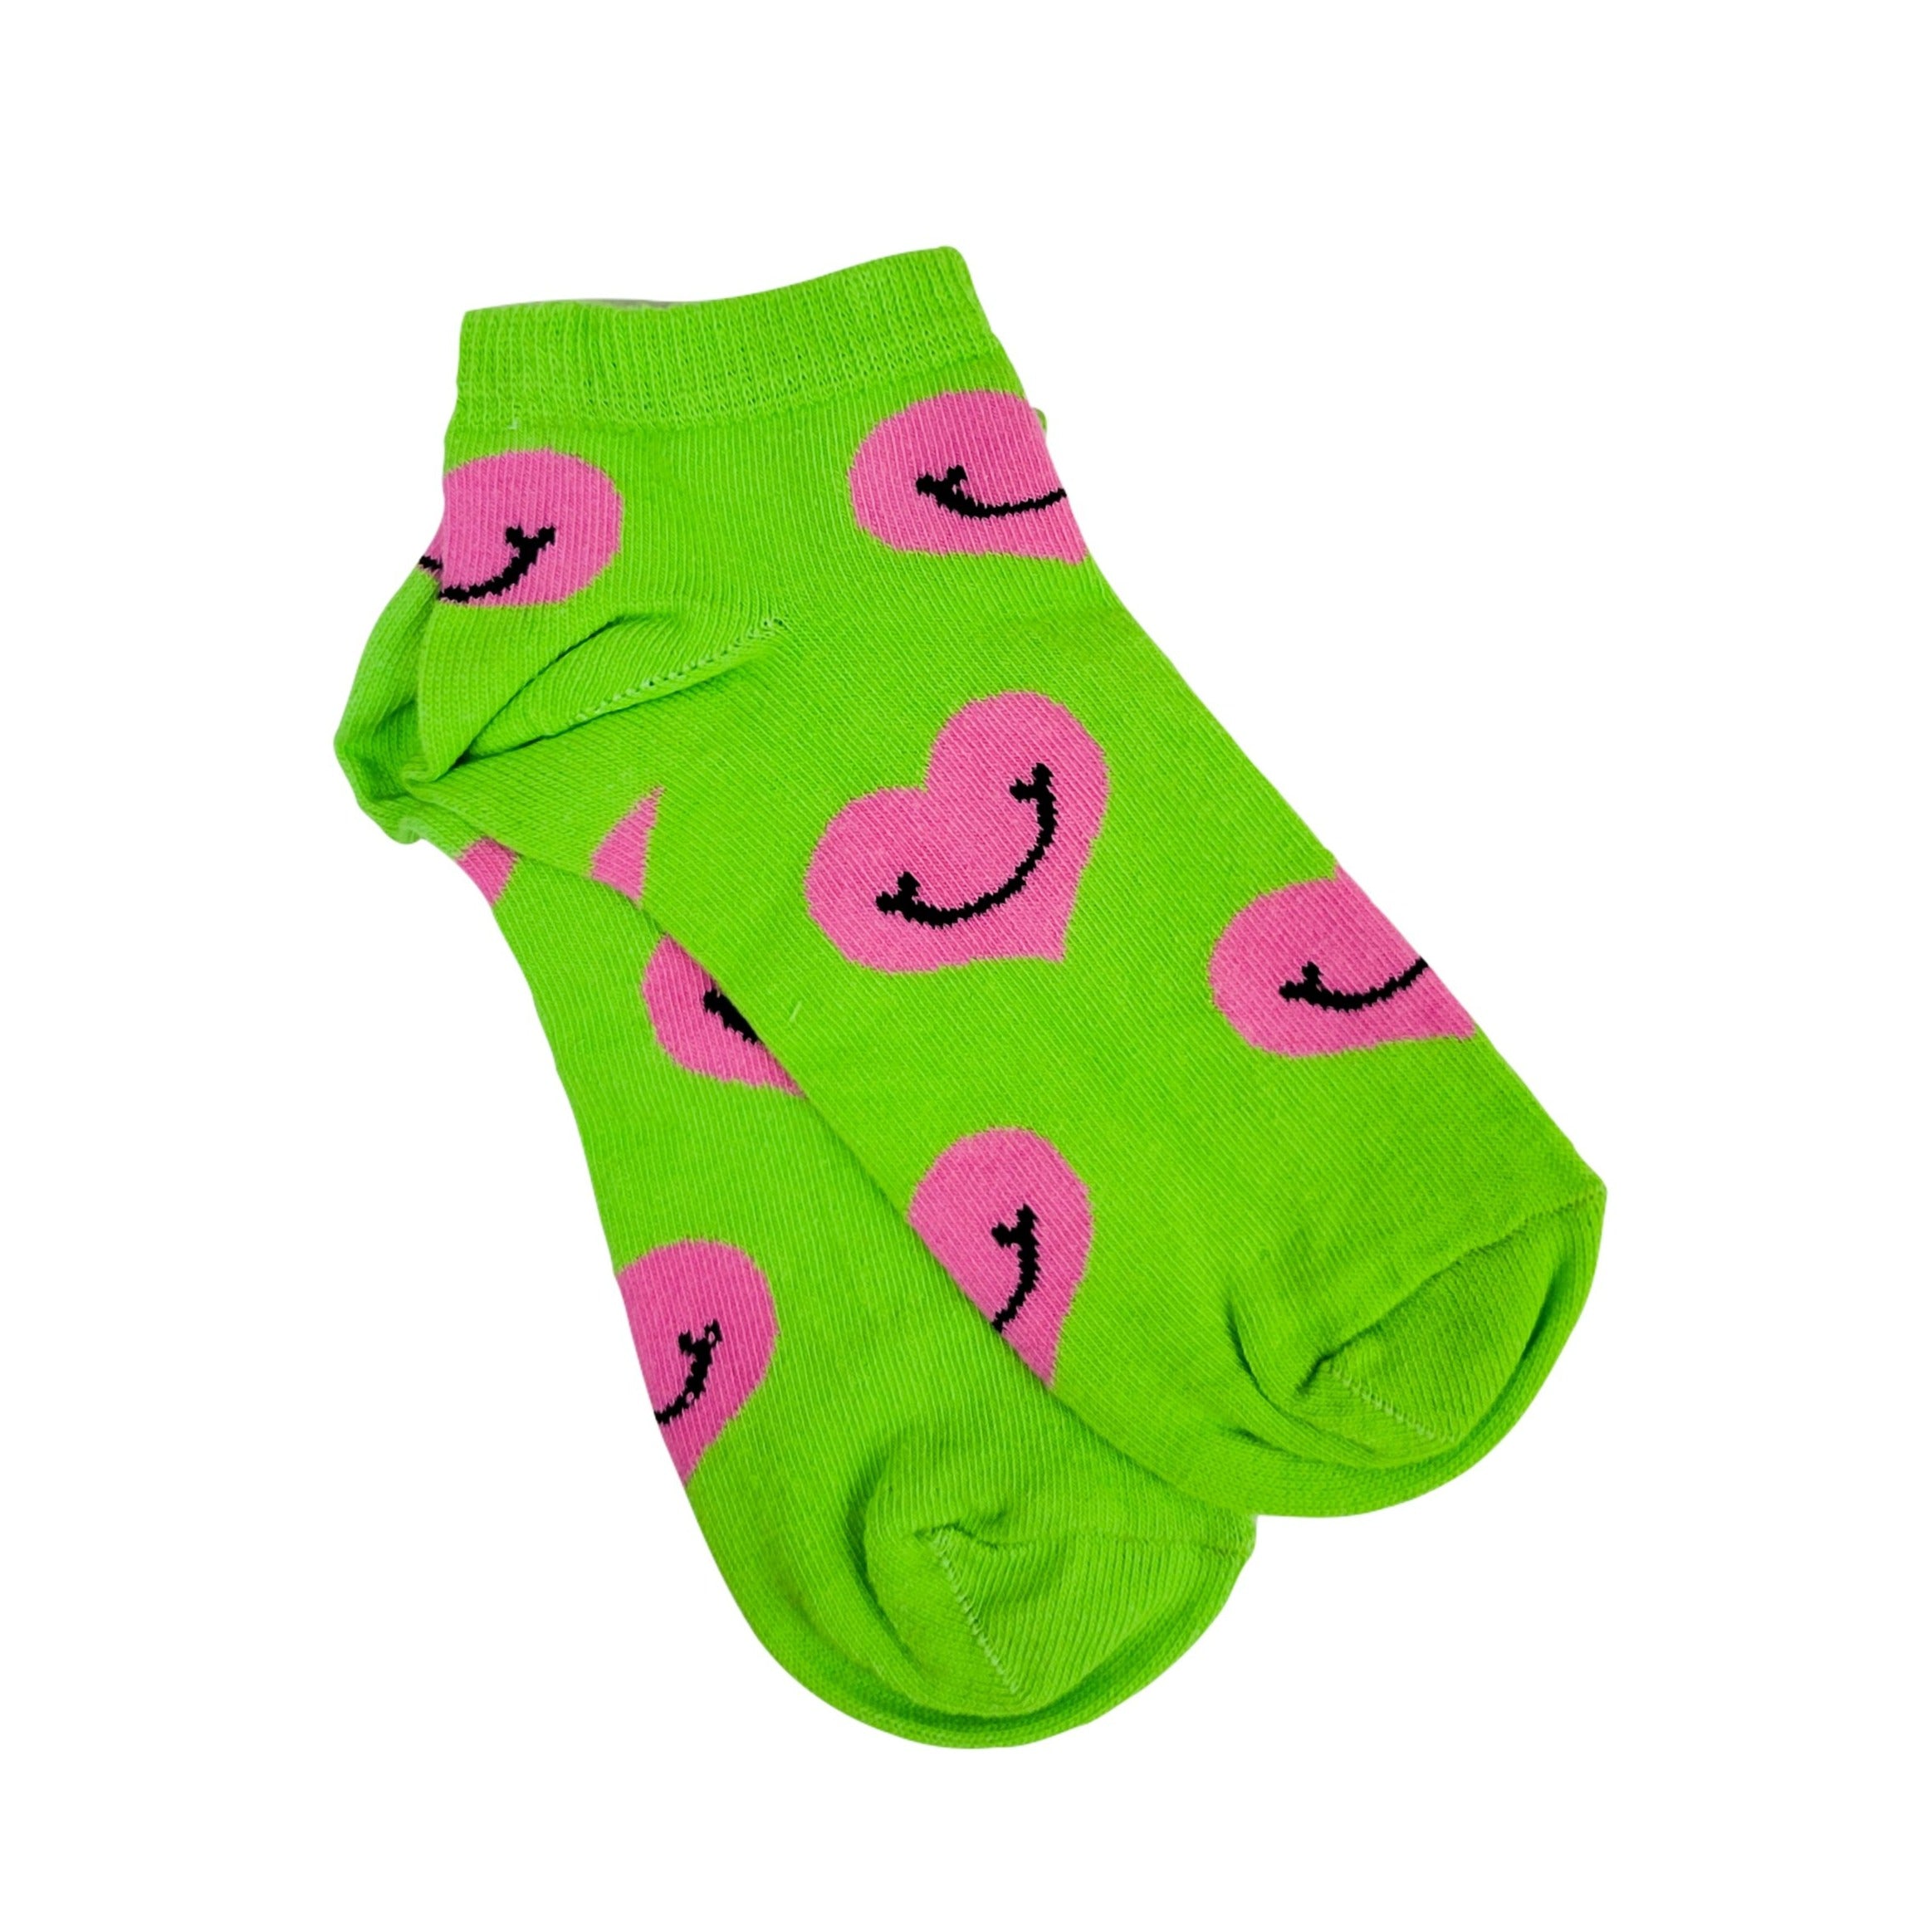 Happy Heart Smiley Face Patterned Ankle Socks (Adult Medium)